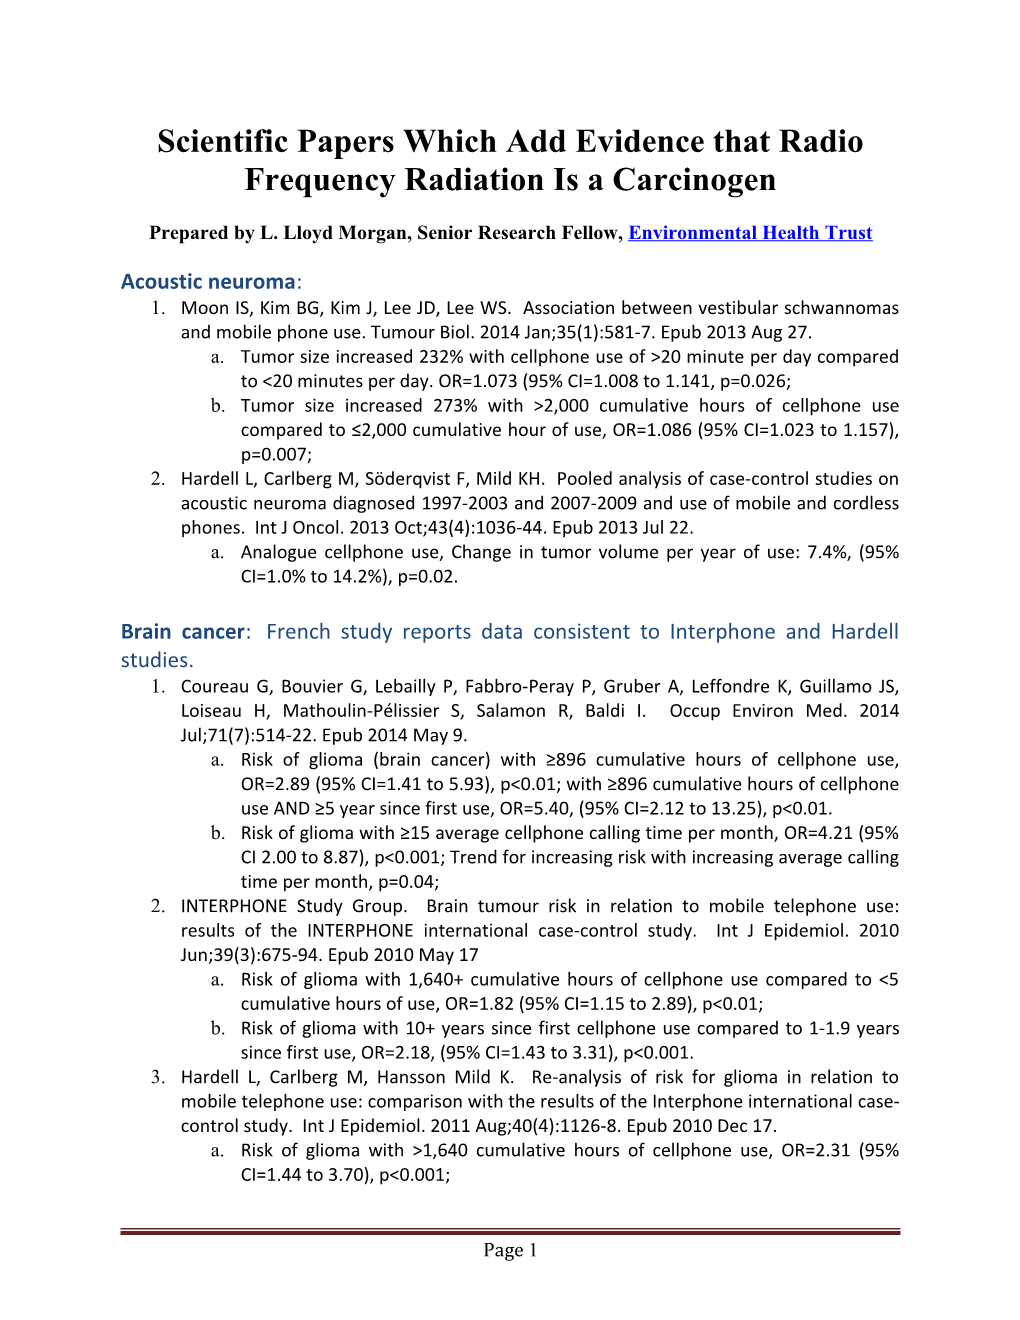 Scientific Papers Which Add Evidence That Radio Frequency Radiation Is a Carcinogen